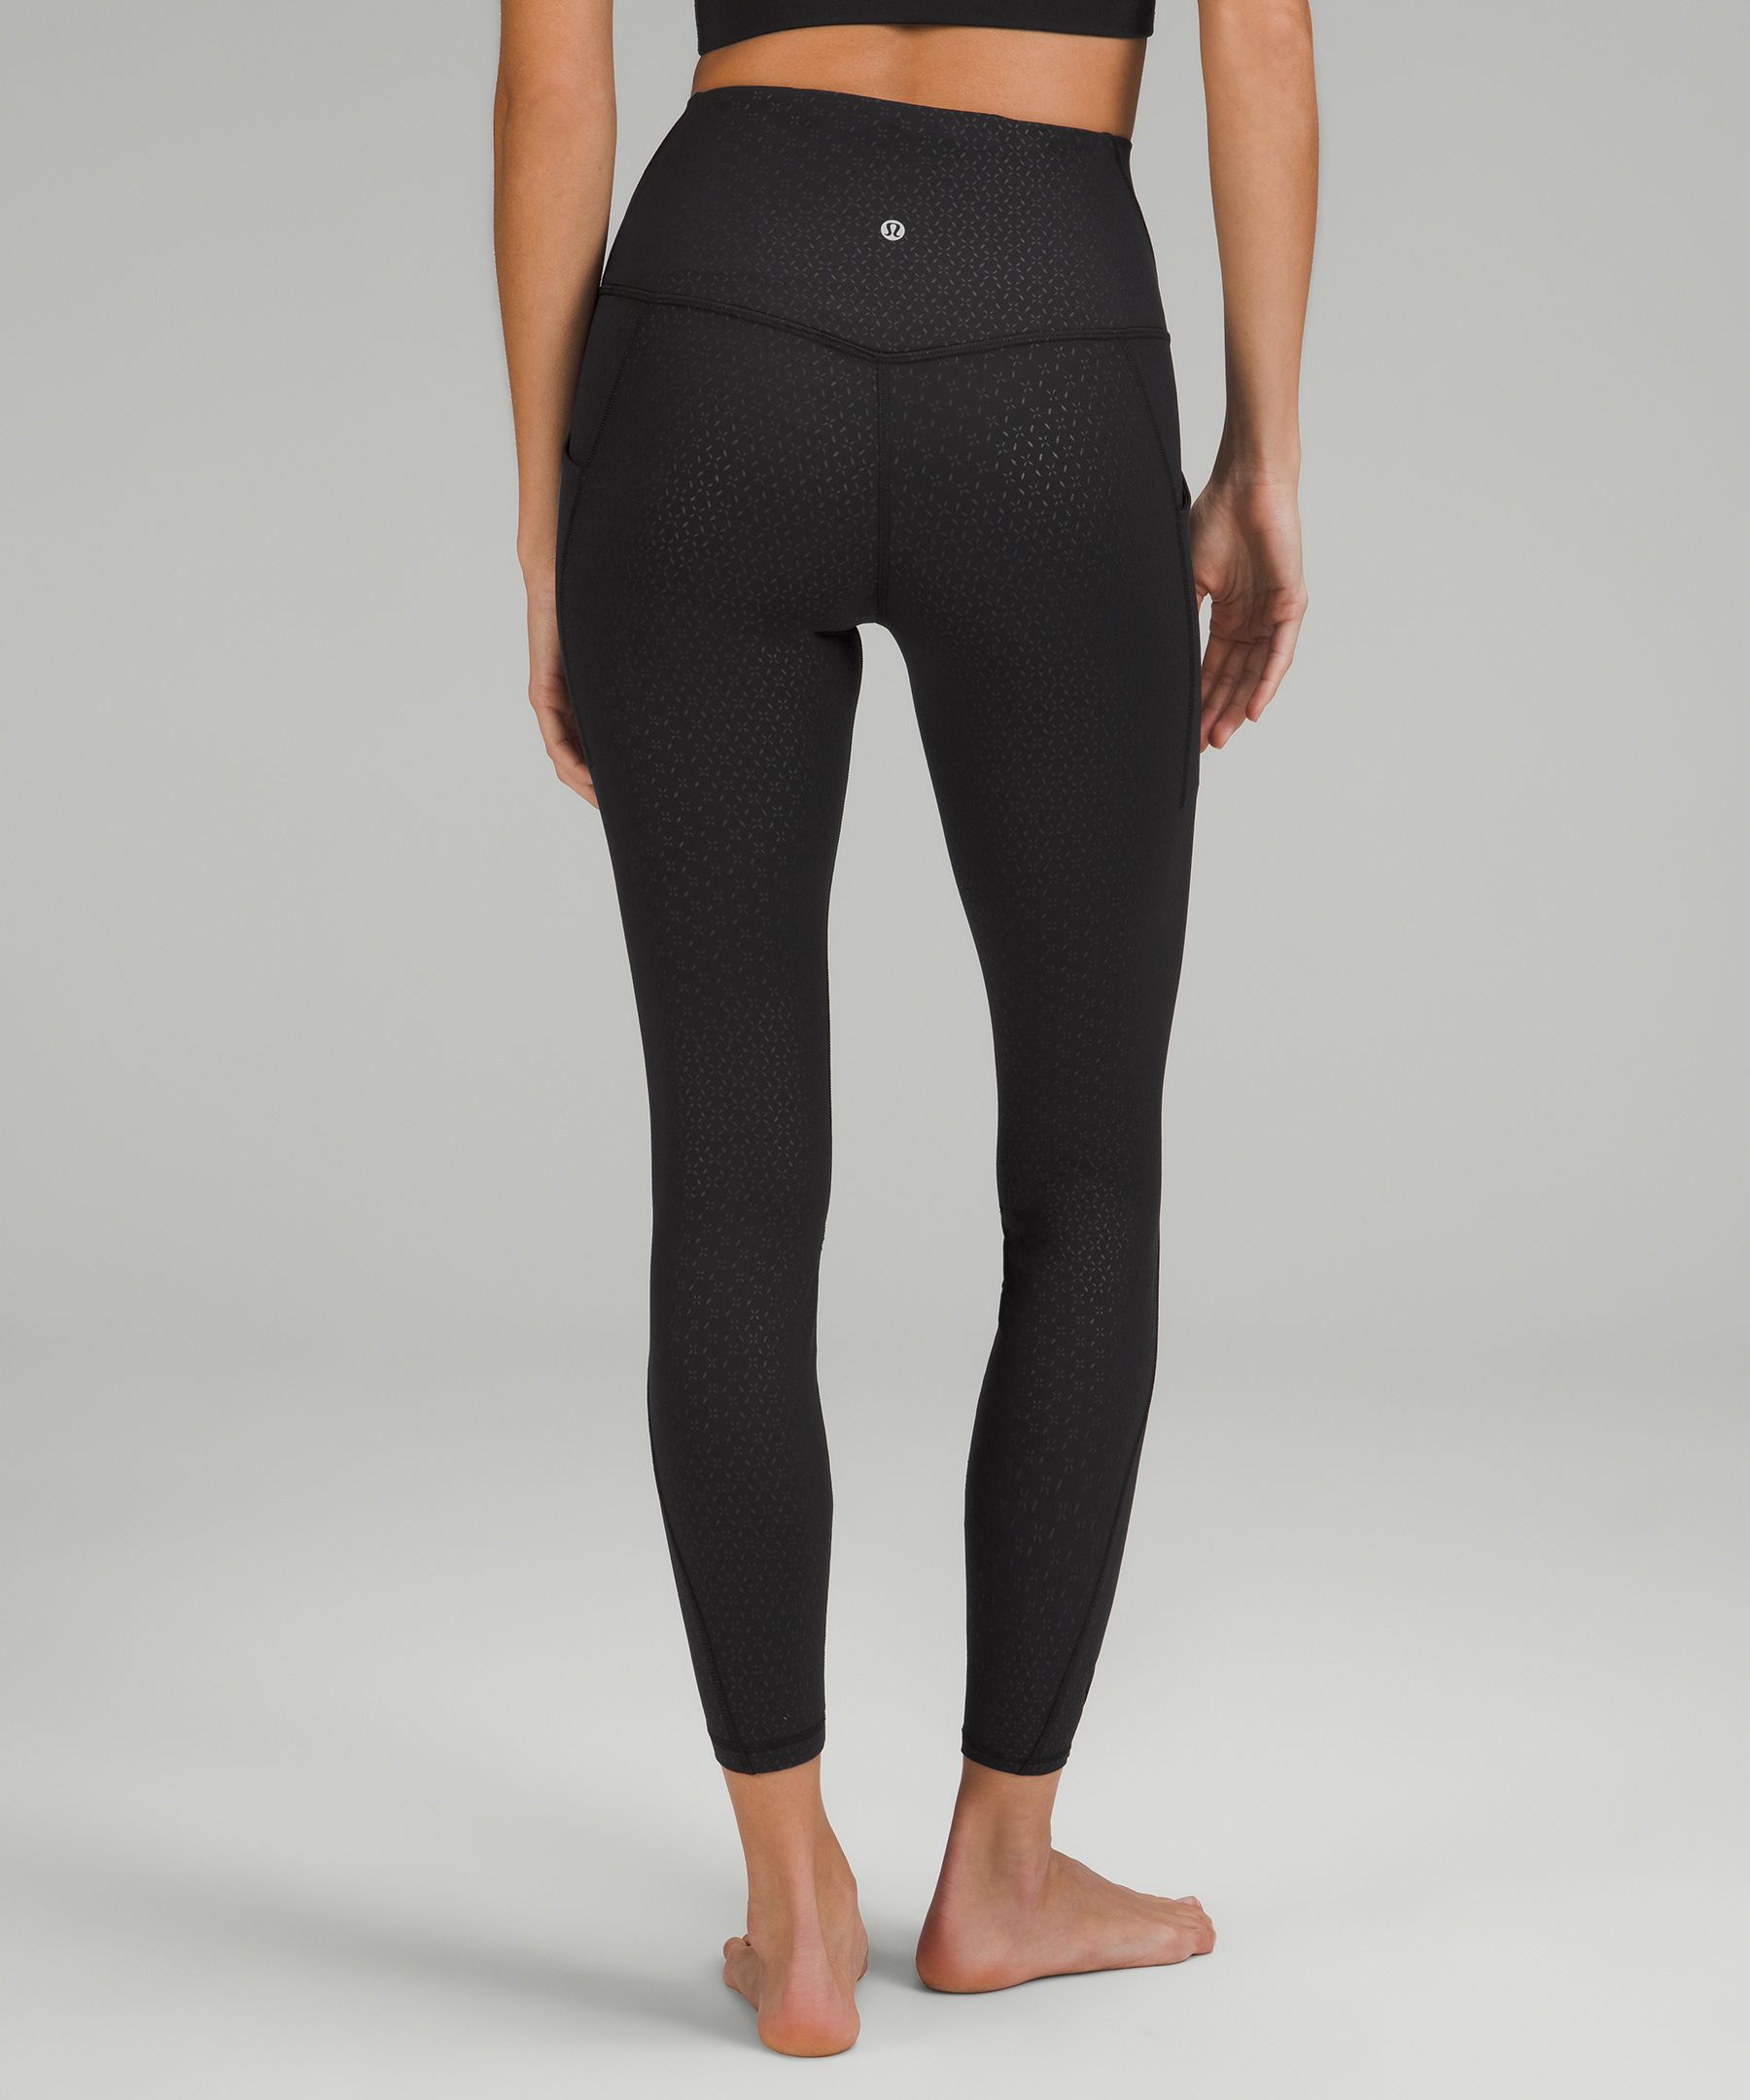 lululemon Align™ High-Rise Pant 25 WITH POCKETS!, Women's Fashion,  Activewear on Carousell